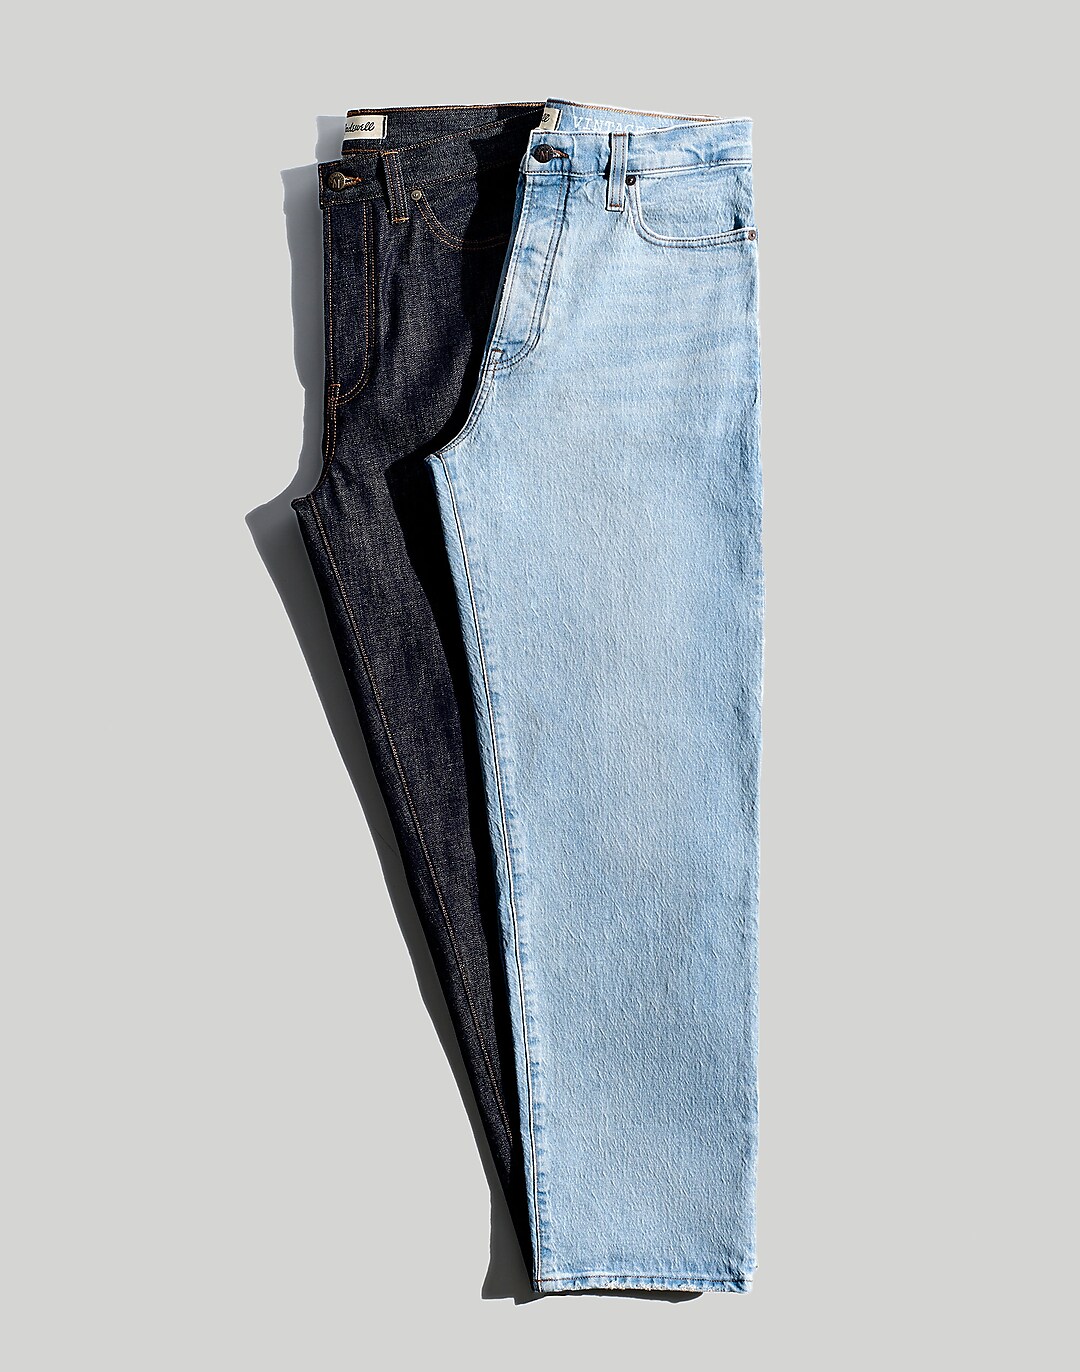 Vintage Relaxed Straight Jeans in Raw Indigo Wash | Straight-Fit Jeans